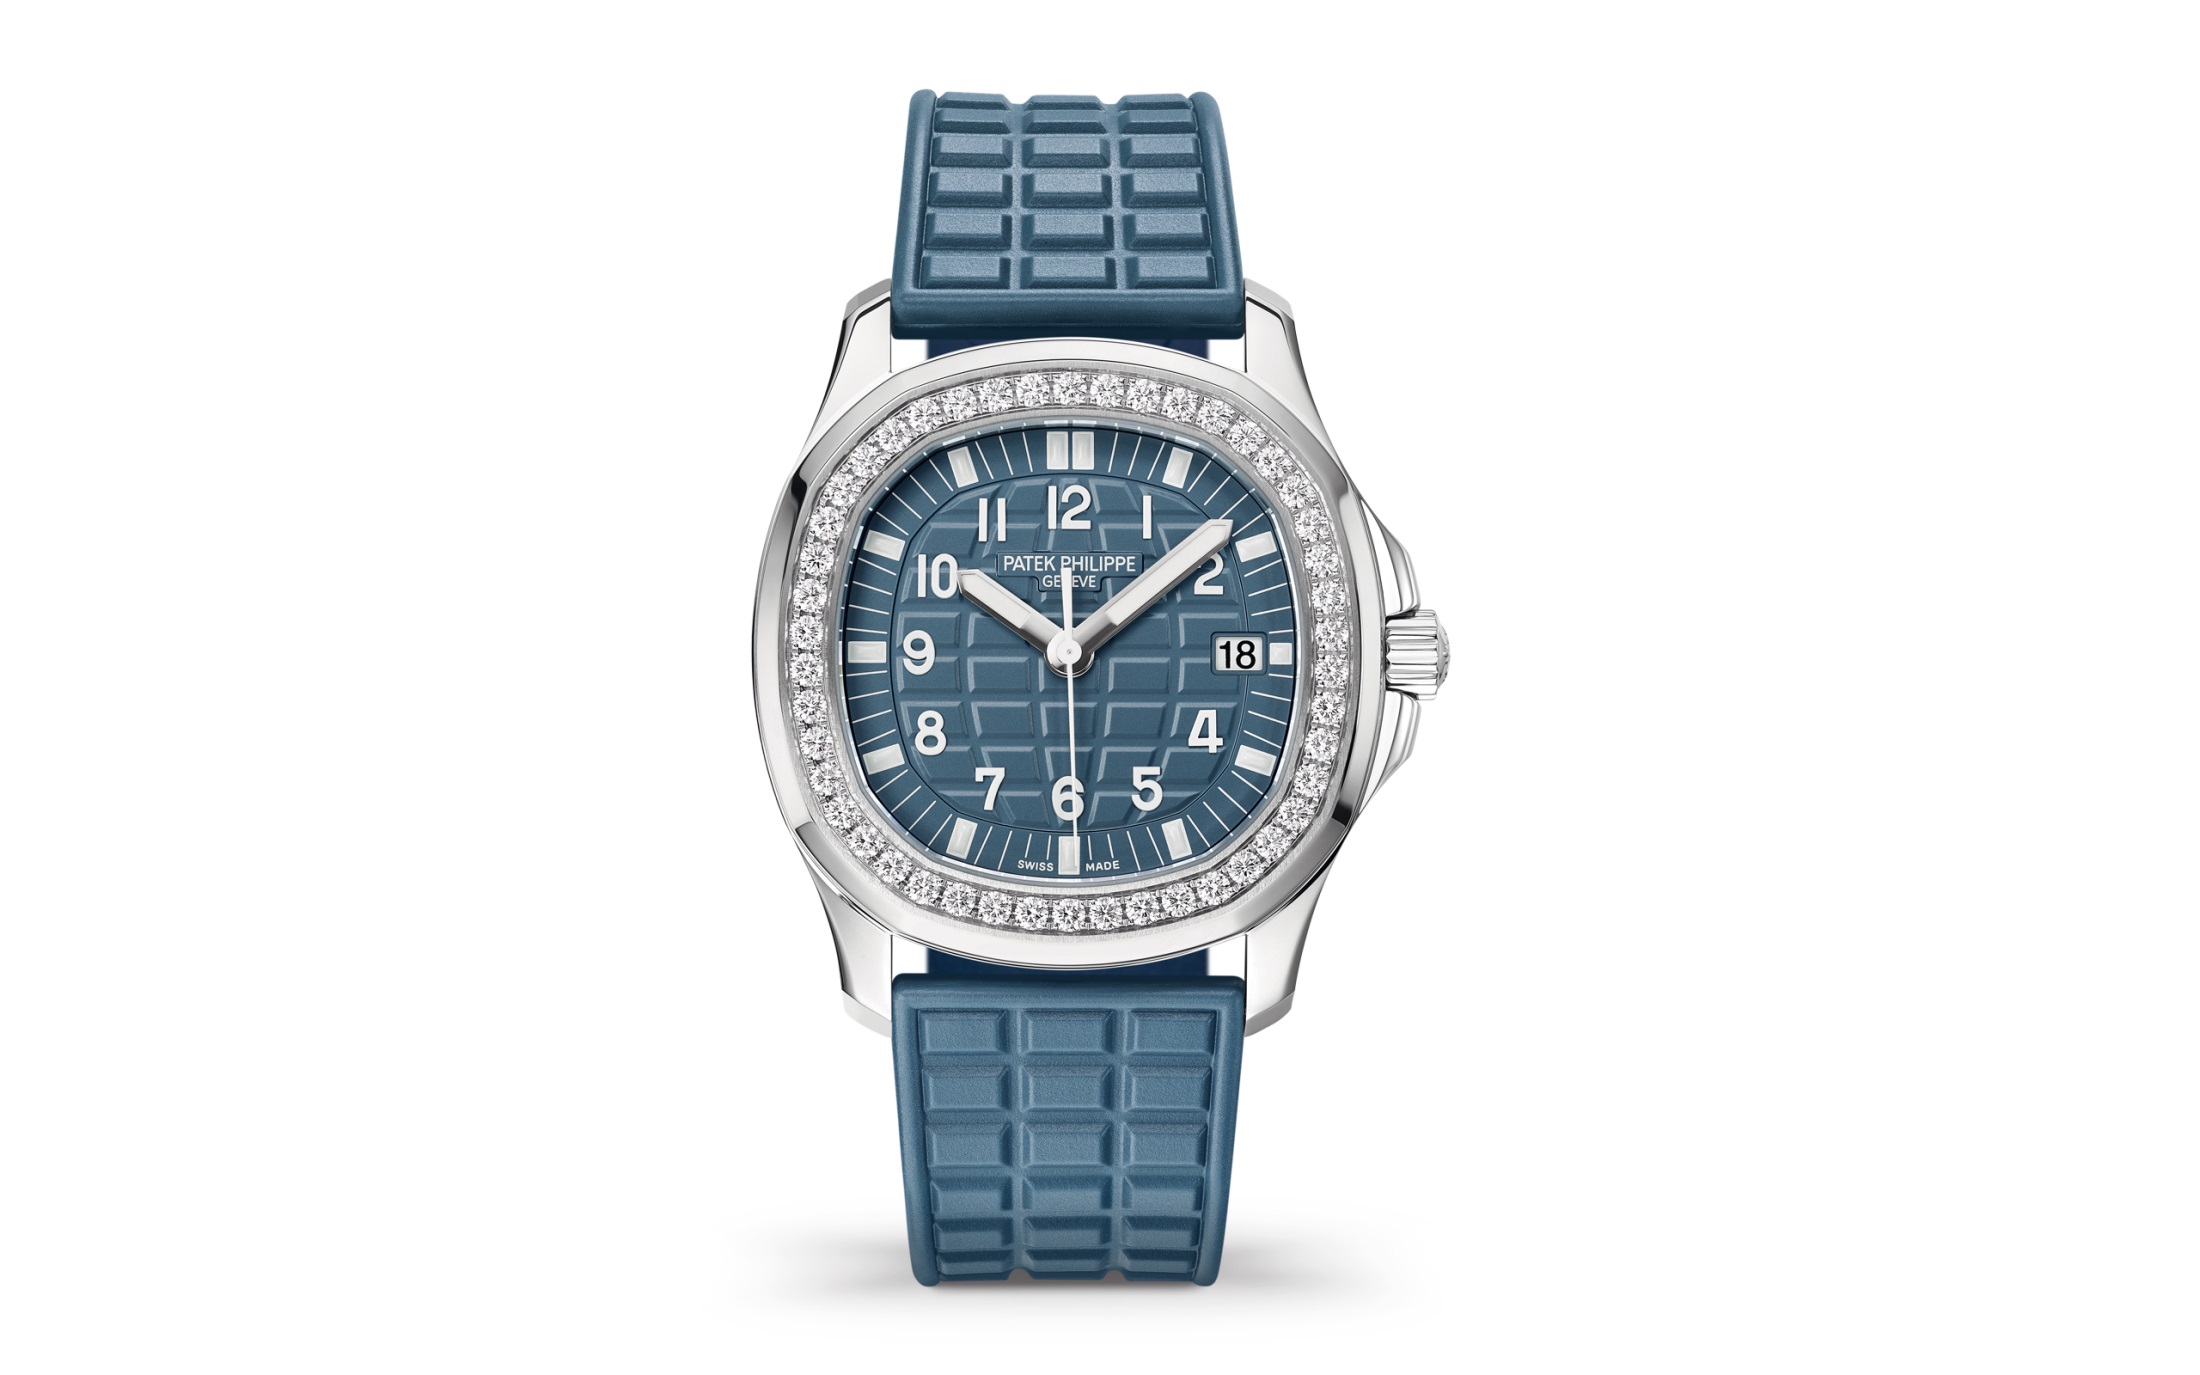 The blue-gray composite strap matches the blue-gray dial well and adorned with the same pattern.